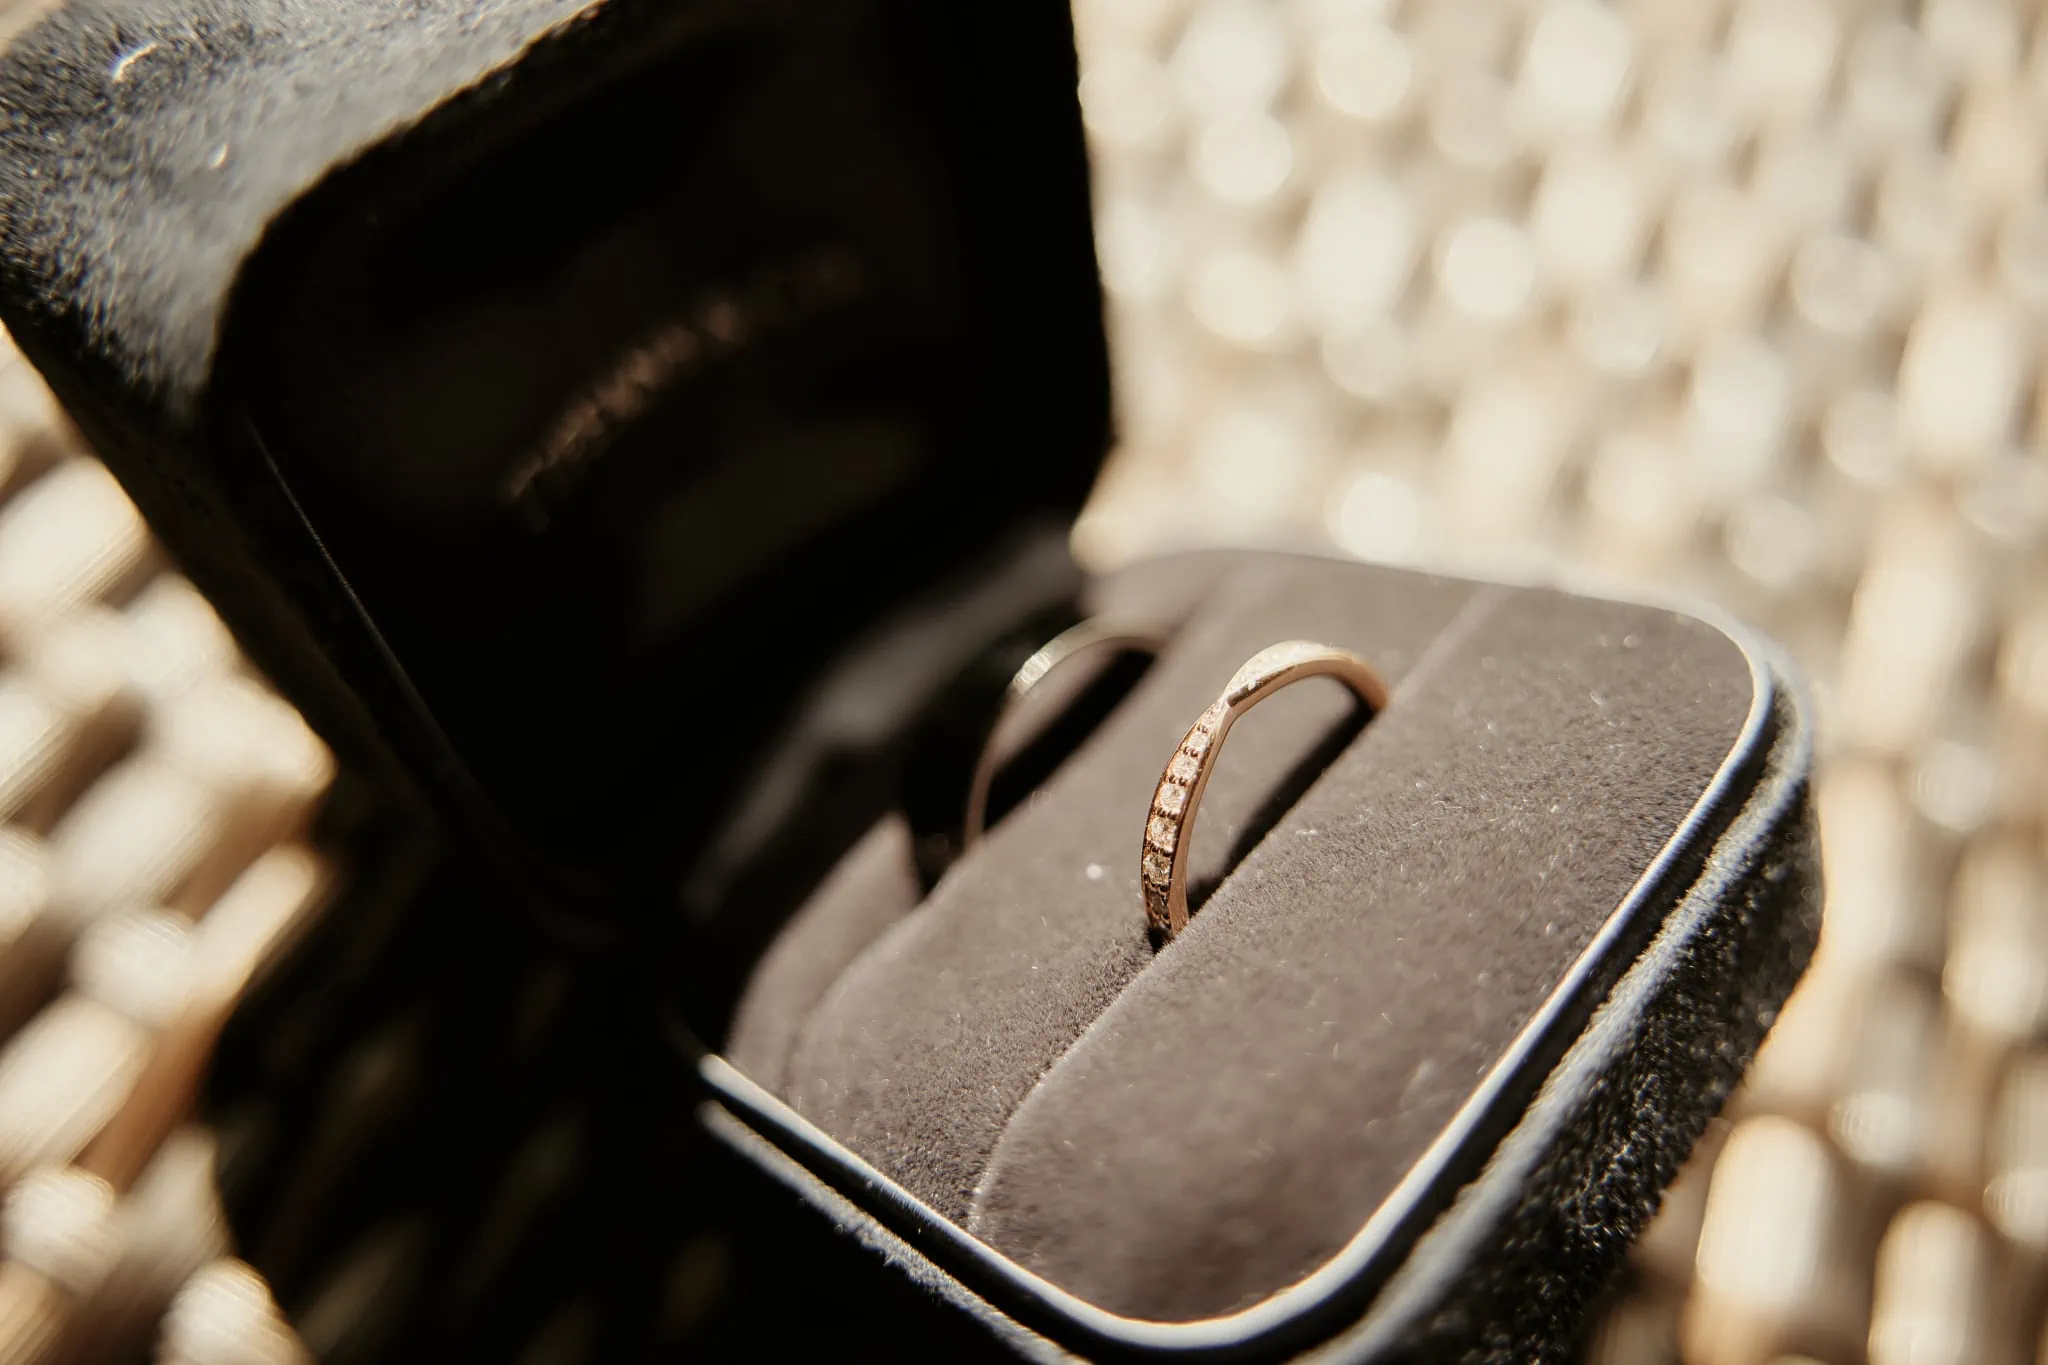 Michelle and Vedran's Rees Valley Station Elopement Wedding featured a wedding ring in a black box on a table.